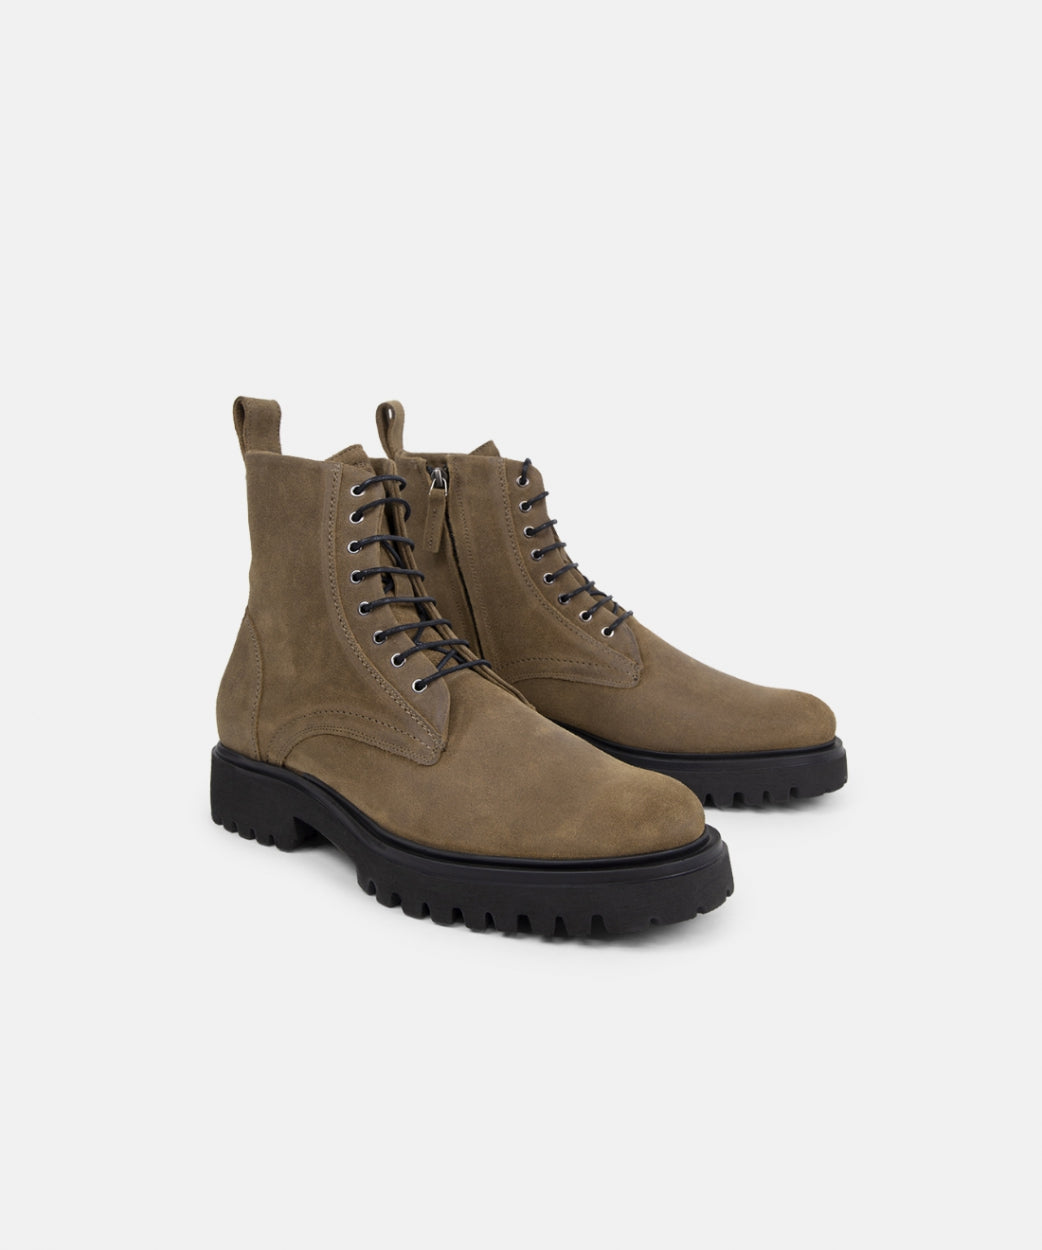 Domino Lace Up Boot Suede 235 | Hazel Brown